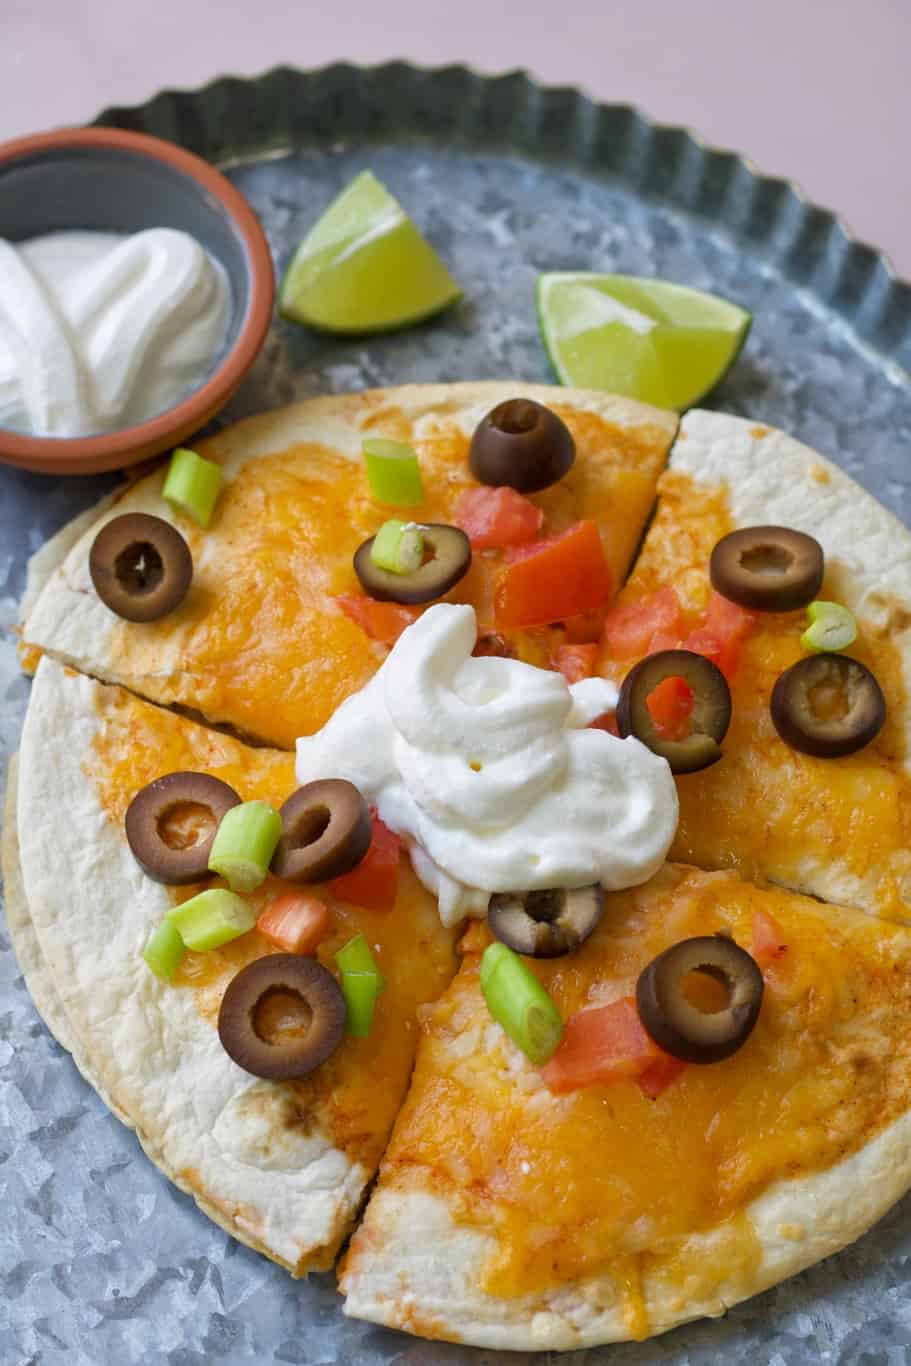 Delicious taco bell pizza topped with olives, green onions, enchilada sauce, roma tomatoes and sour cream